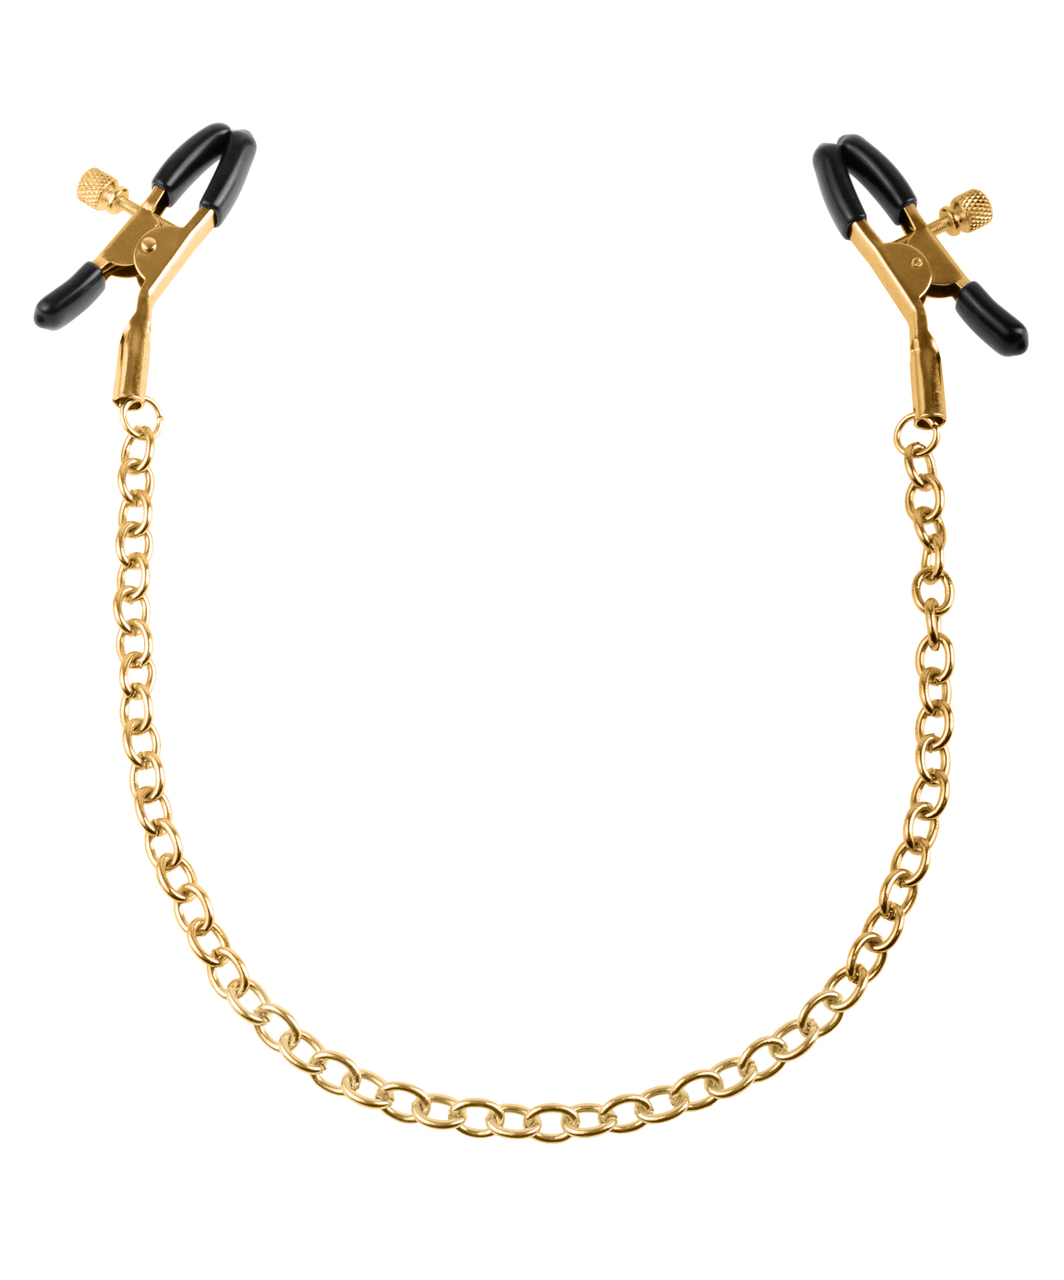 Fetish Fantasy Series Gold Chain Nipple Clamps